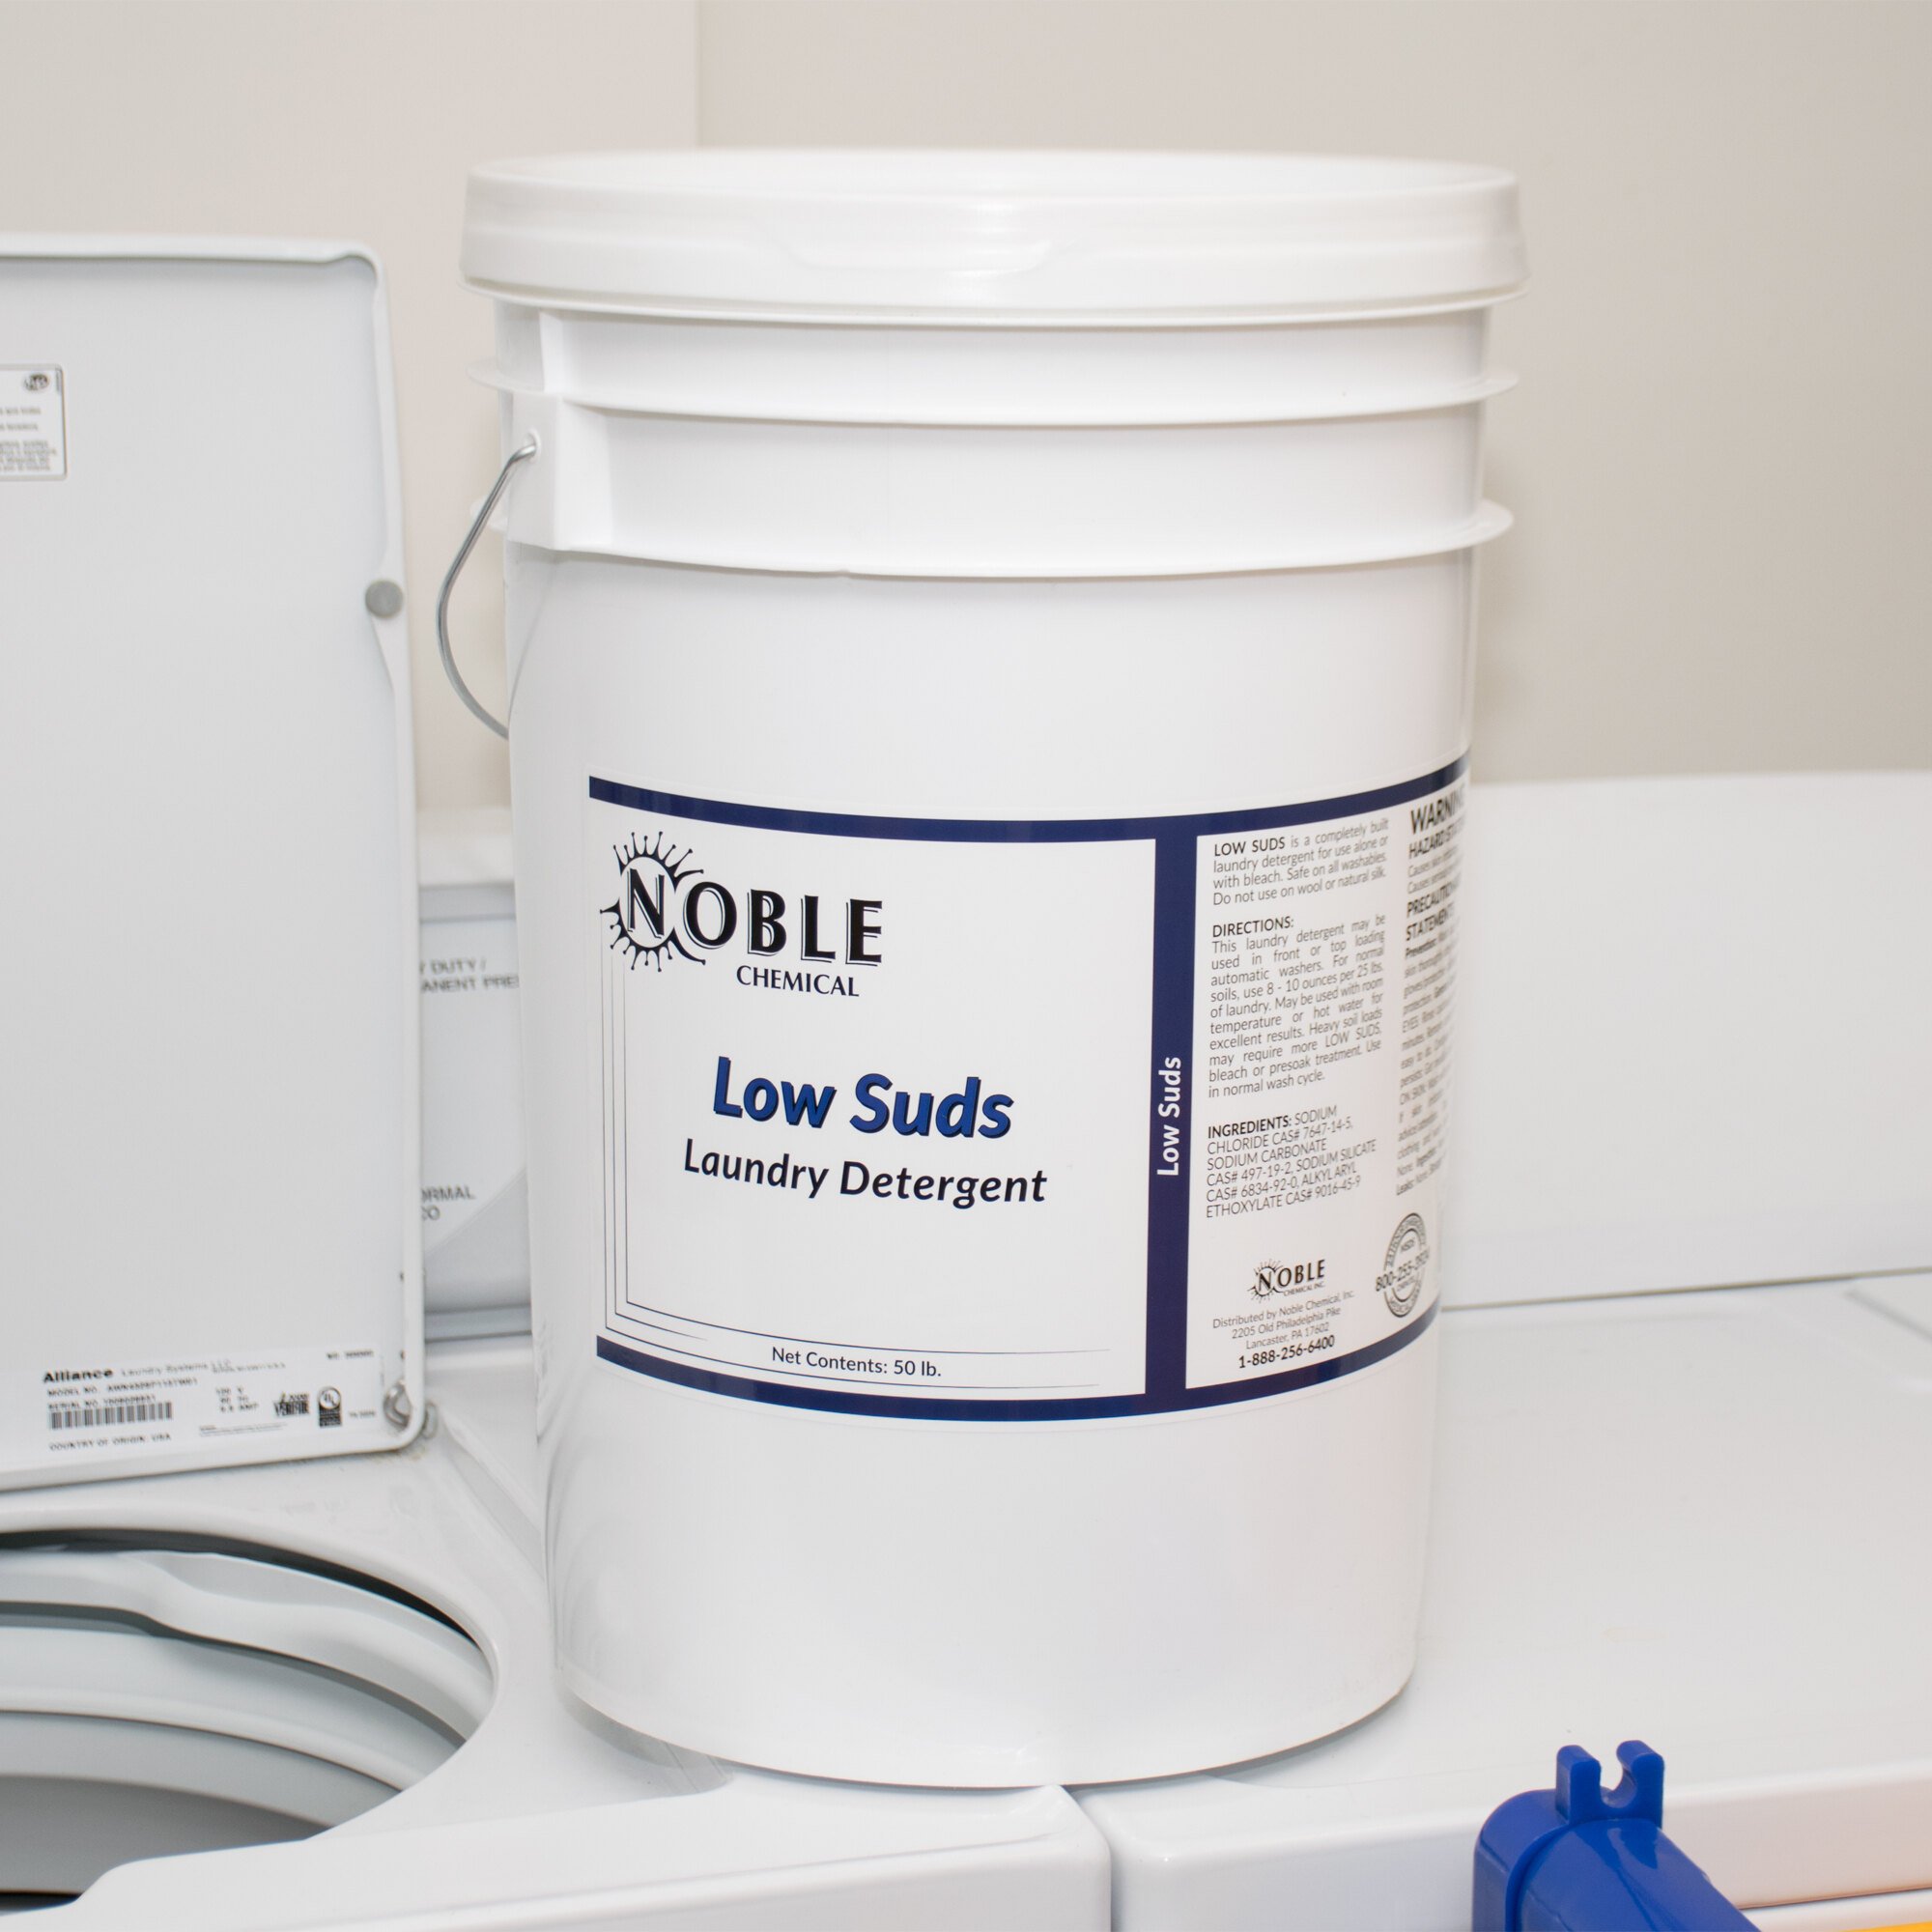 Bucket of Noble Chemical Low Suds detergent on top of a washer